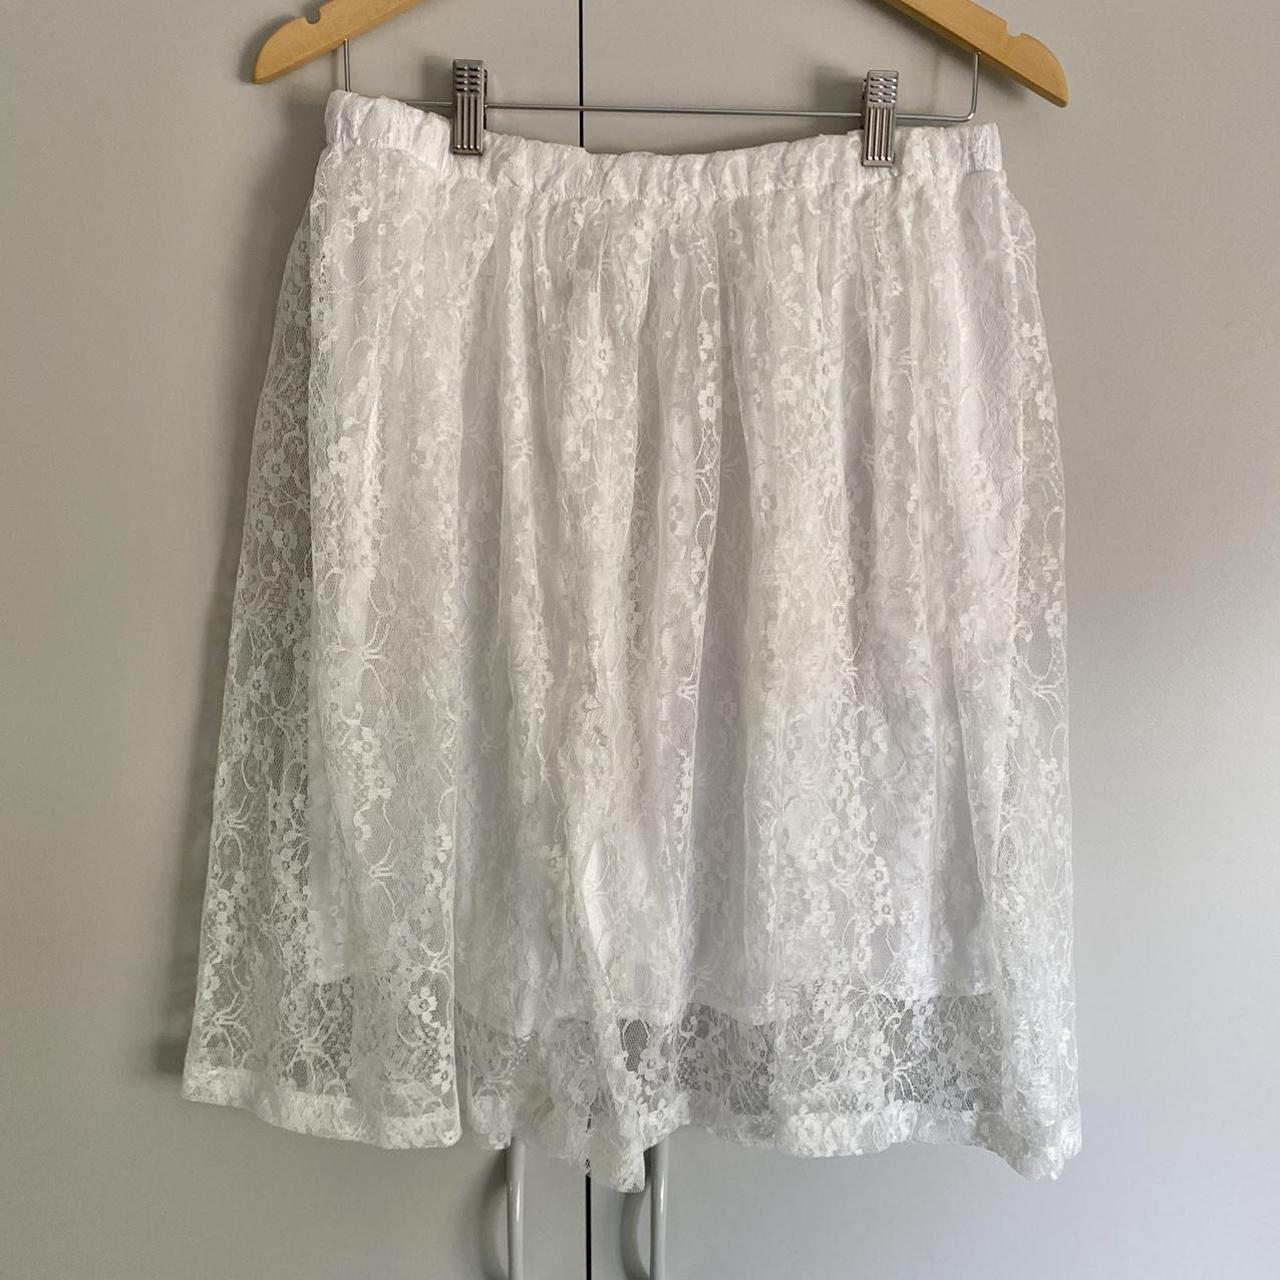 Daisy Skirt. White floral lace skirt with an elastic... - Depop